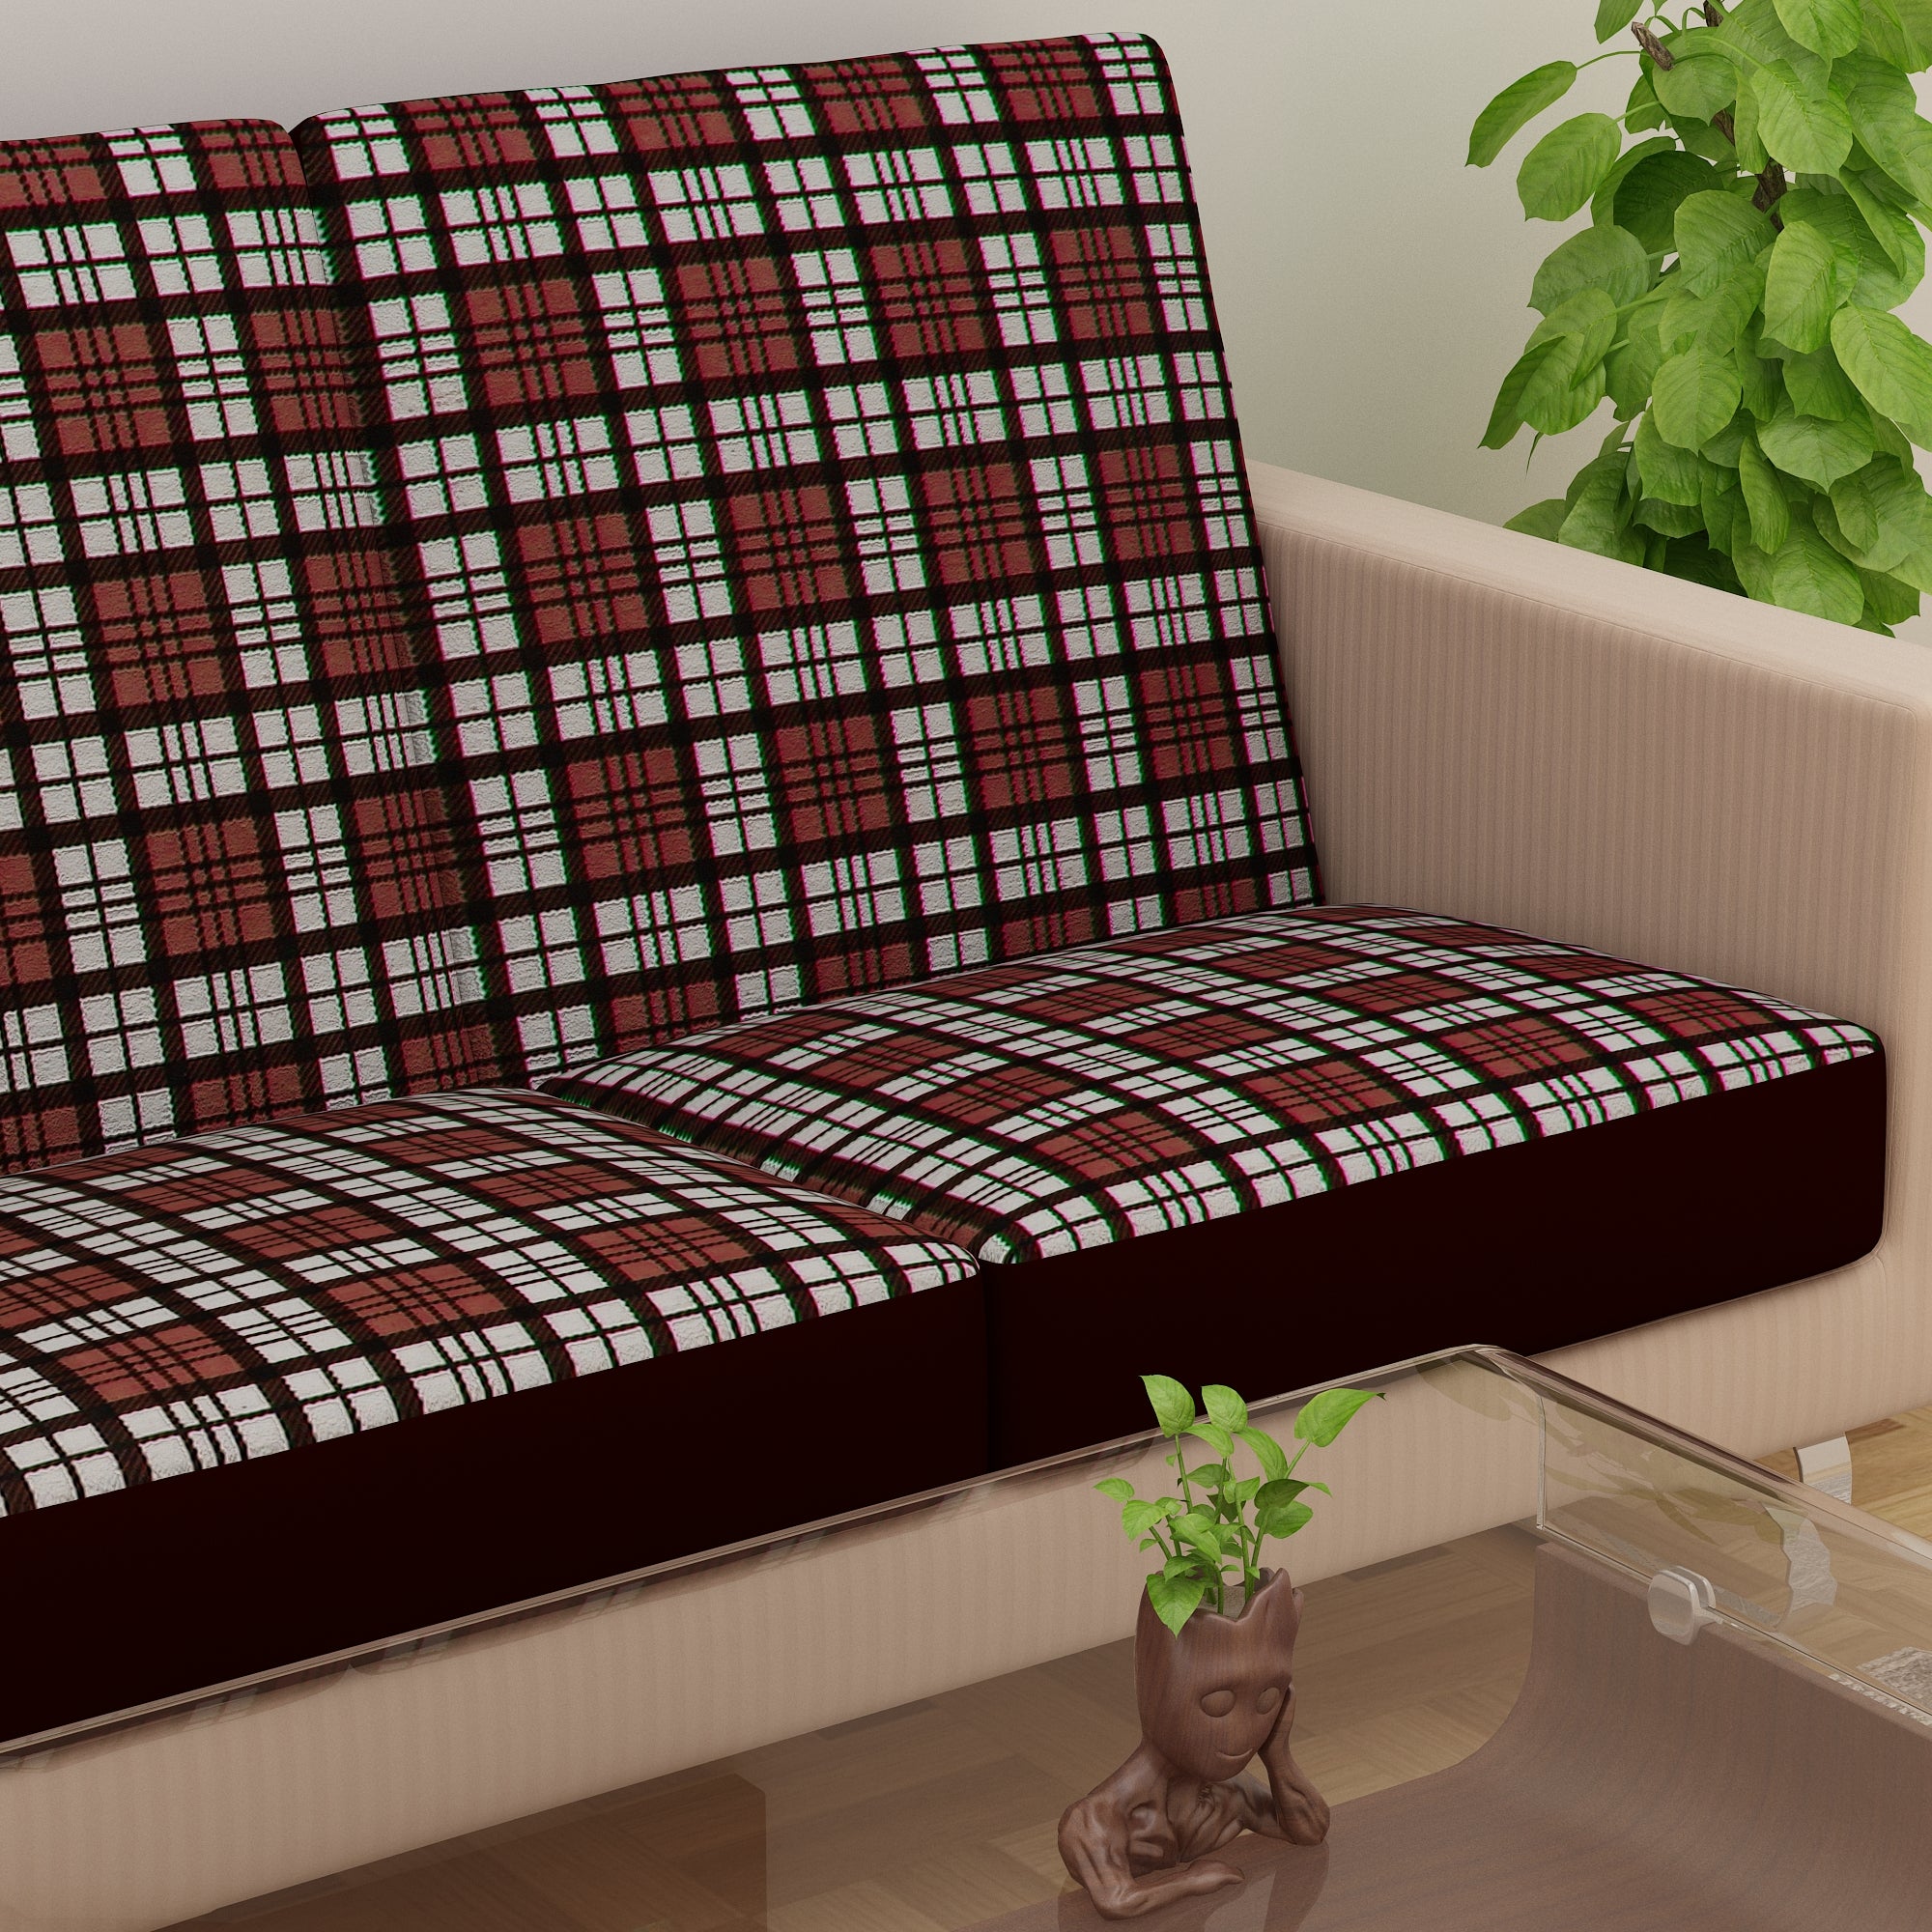 Waterproof Printed Sofa Seat Protector Cover with Stretchable Elastic, Brown White - Dream Care Furnishings Private Limited